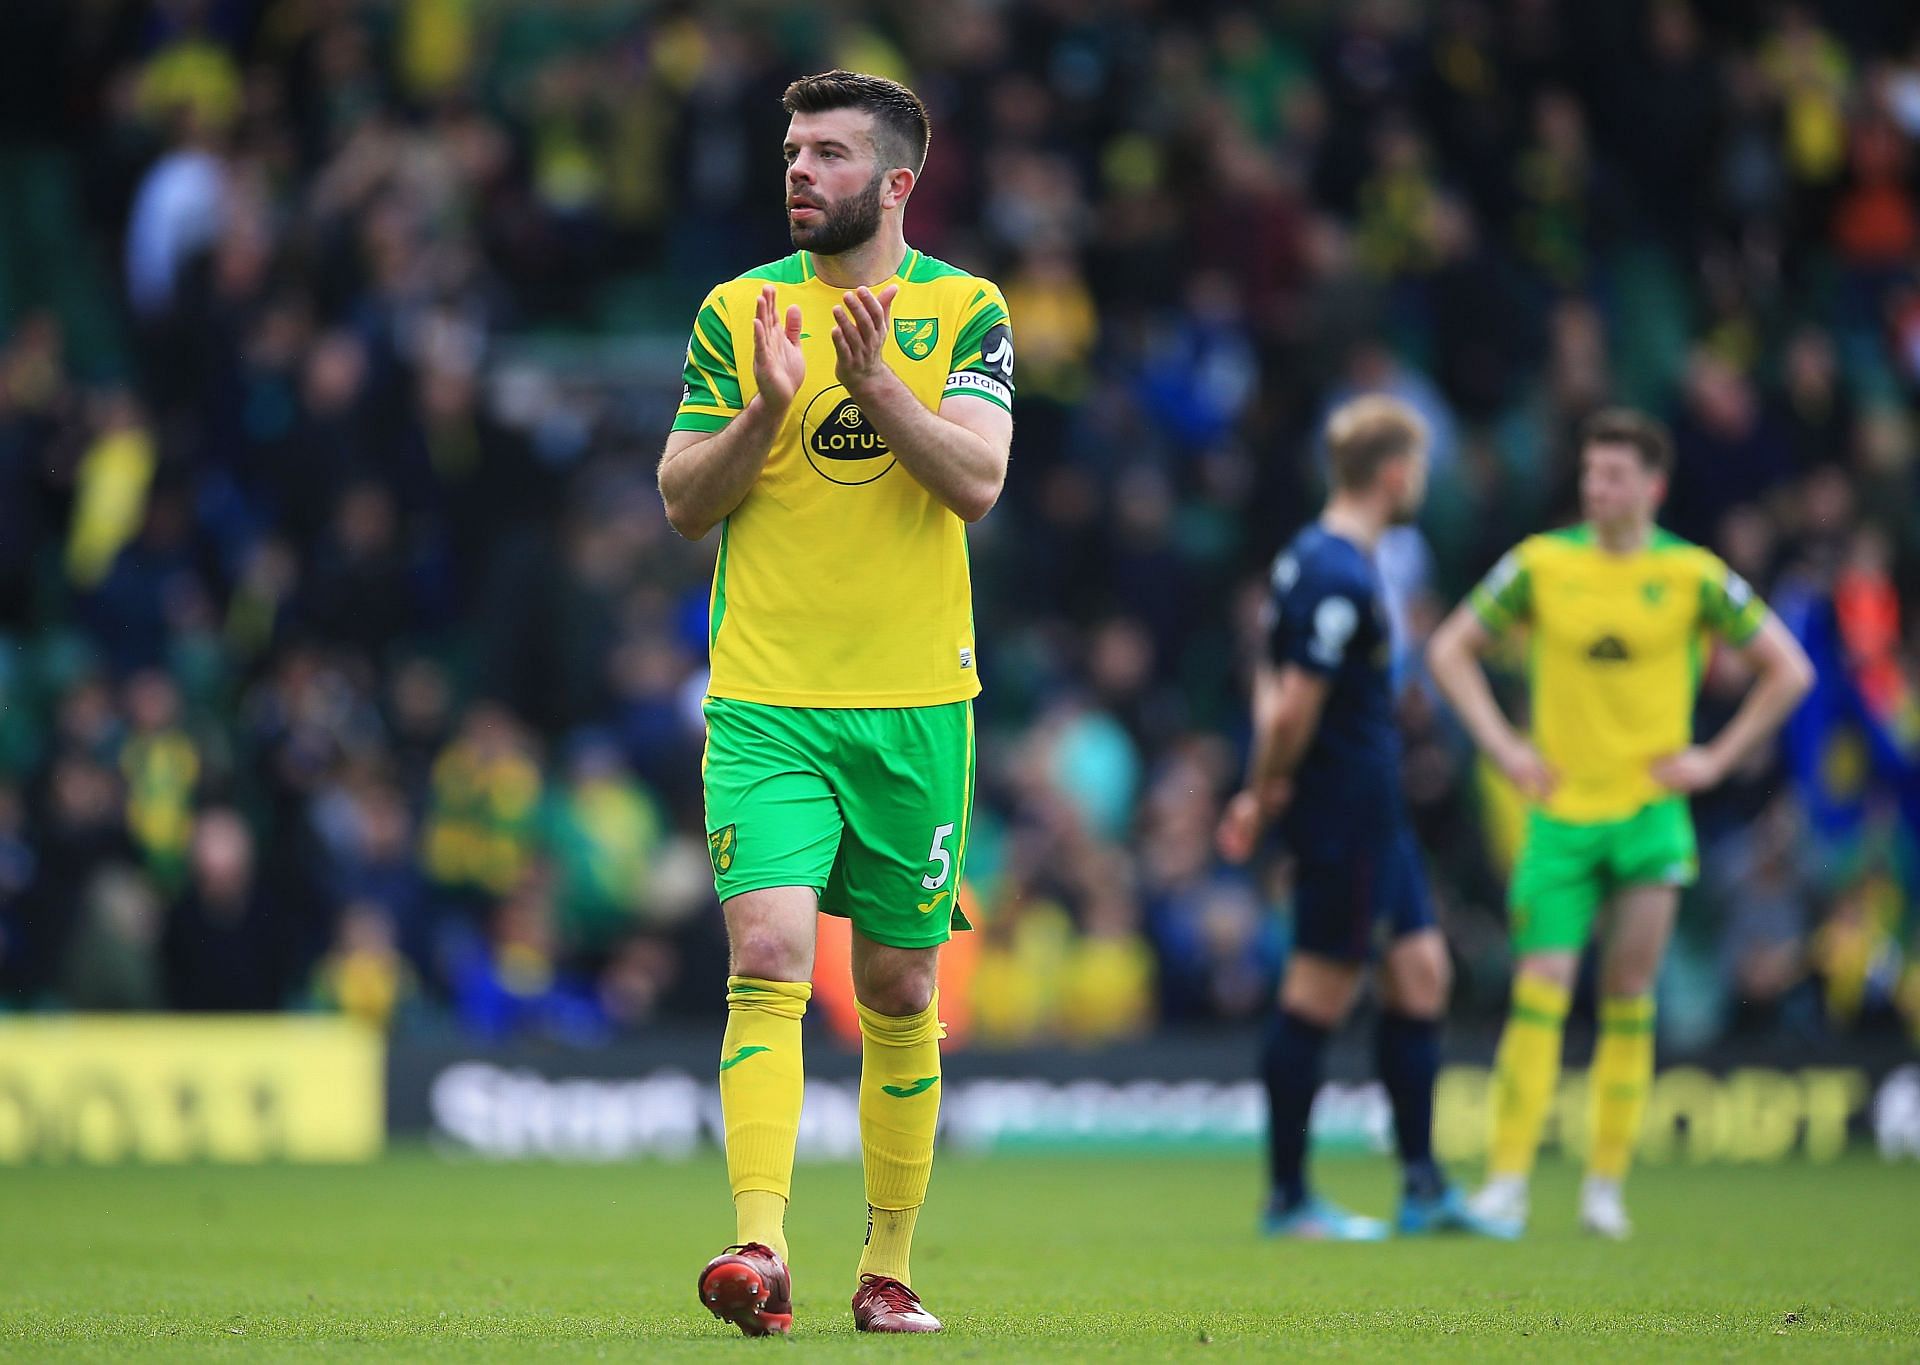 Grant Hanley has been solid for Norwich City this season.